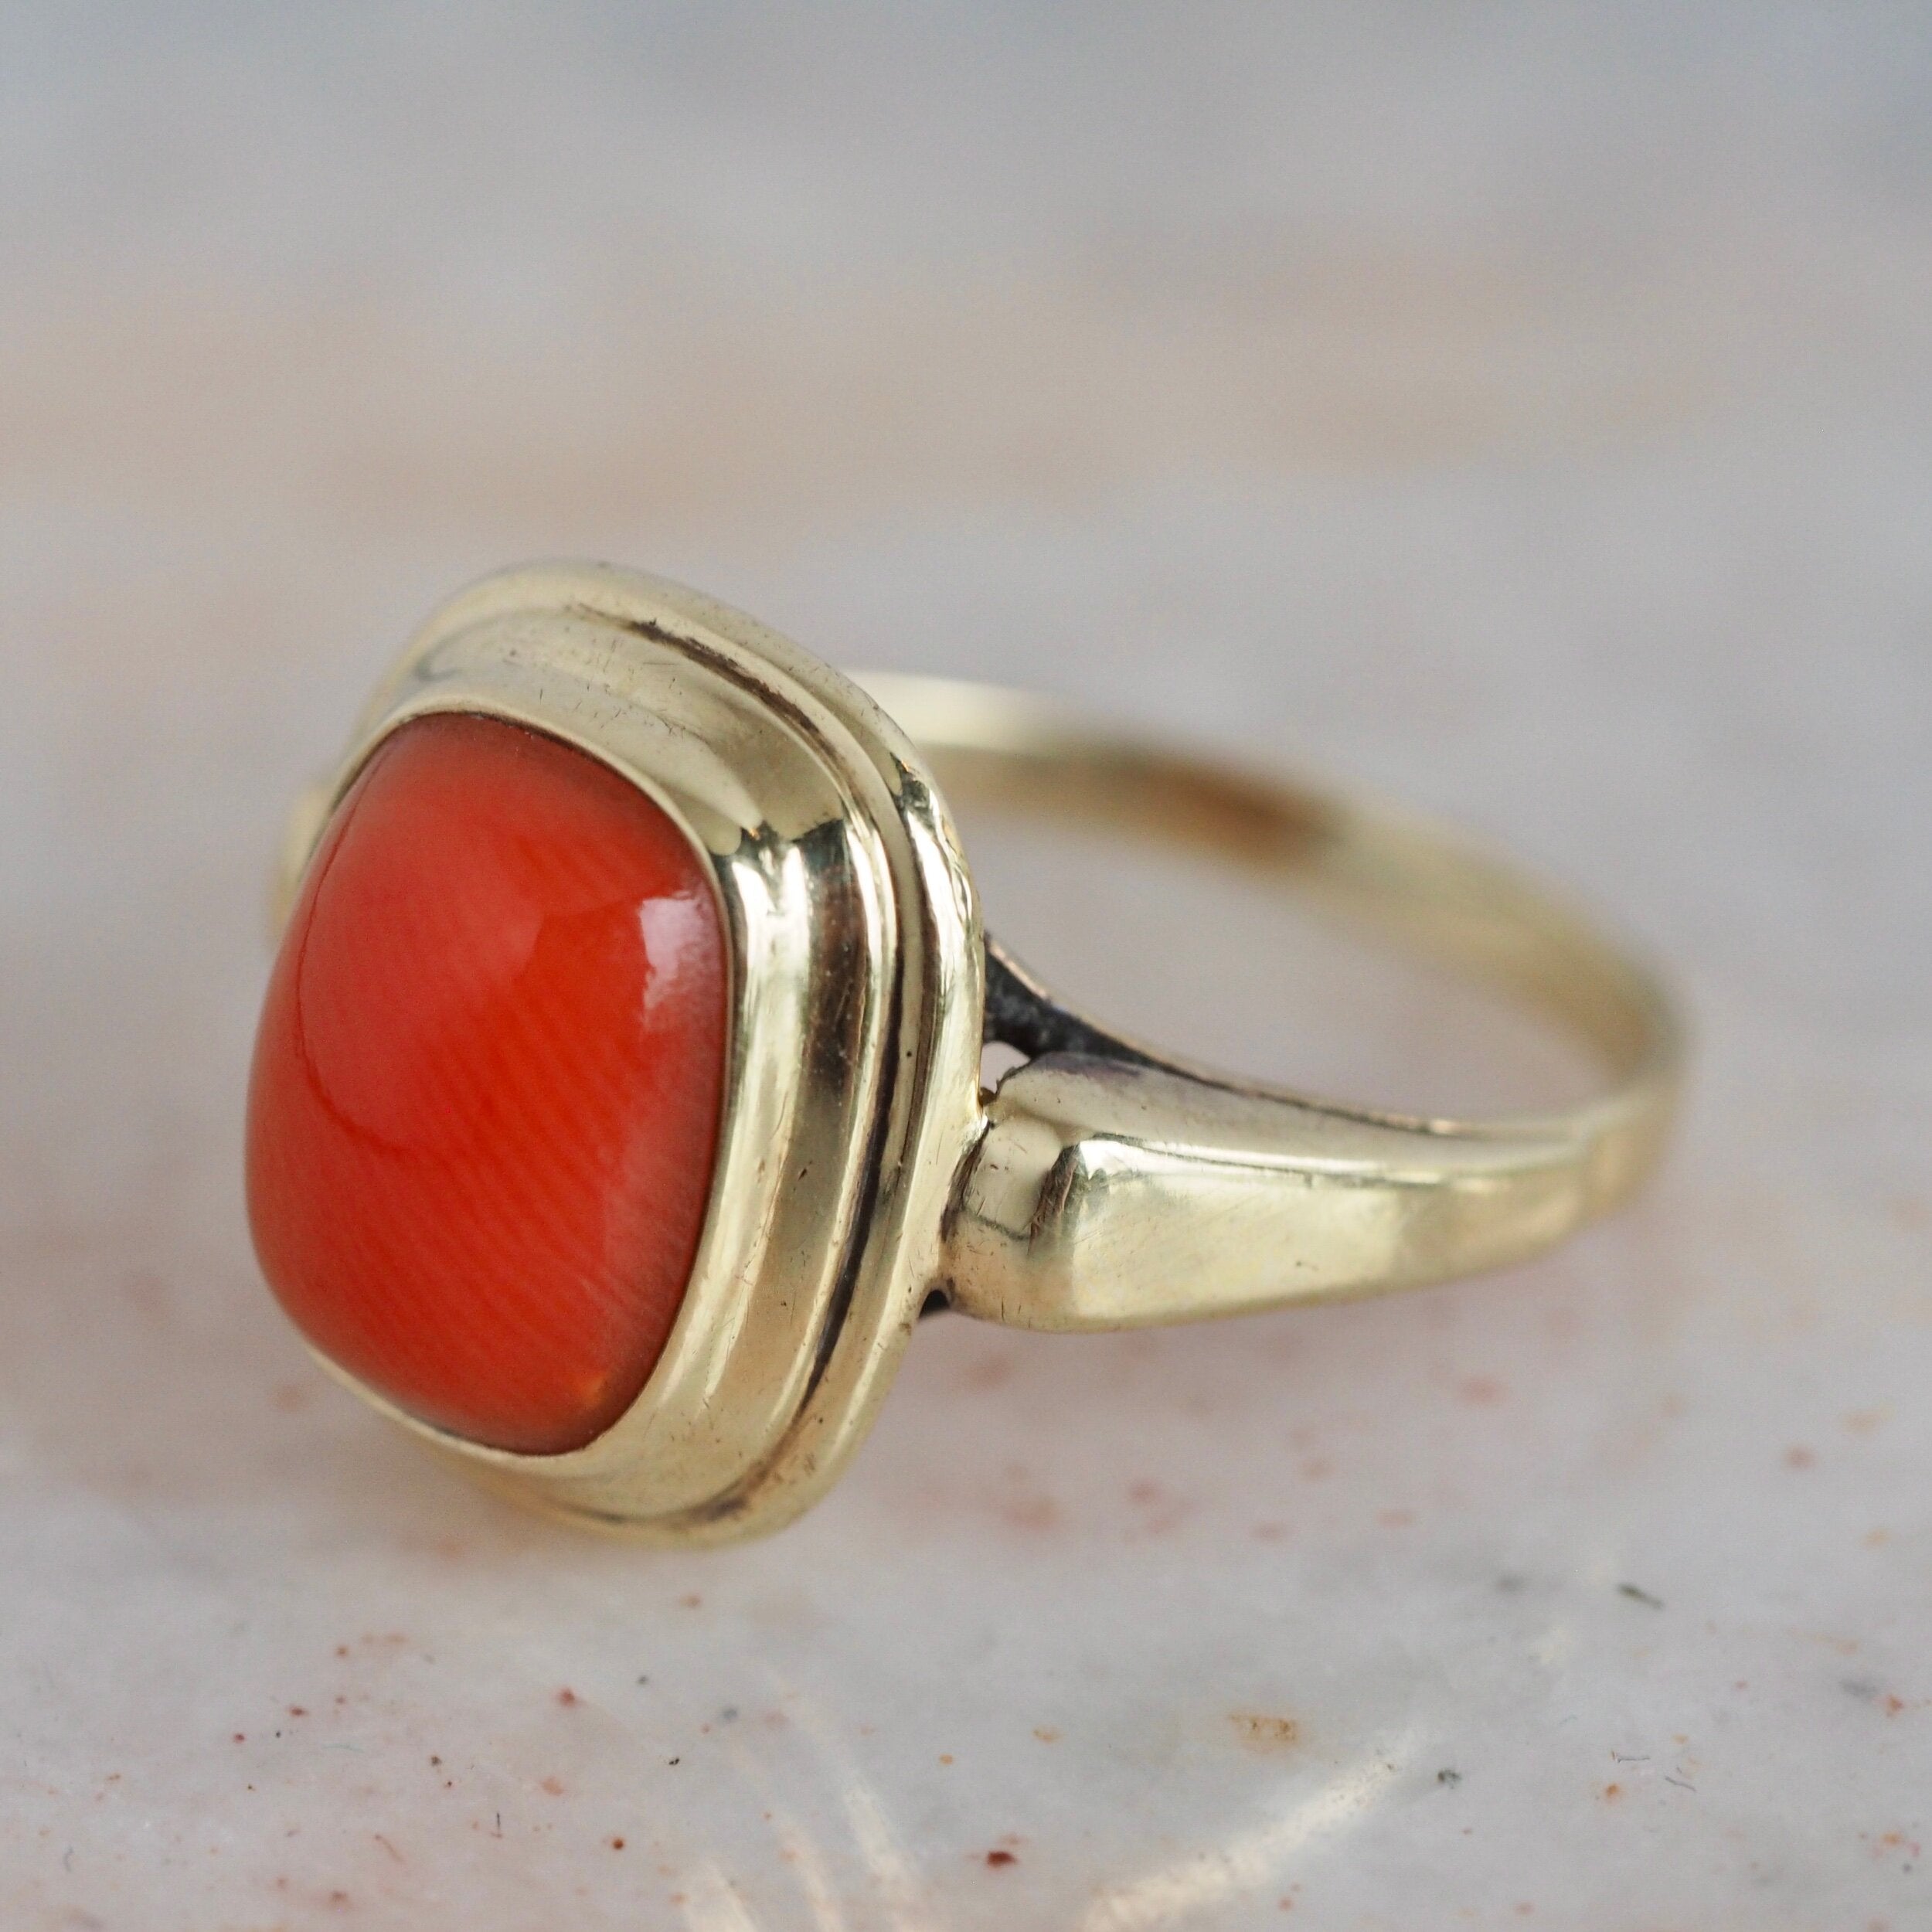 Amazon.com: red coral ring, 925 sterling silver, handmade jewelry, red coral  men's ring, gemstone ring, metaphysical ring, healing power ring, spiritual  ring, father's gift ring, birthday gift ring, Christmas : Handmade Products